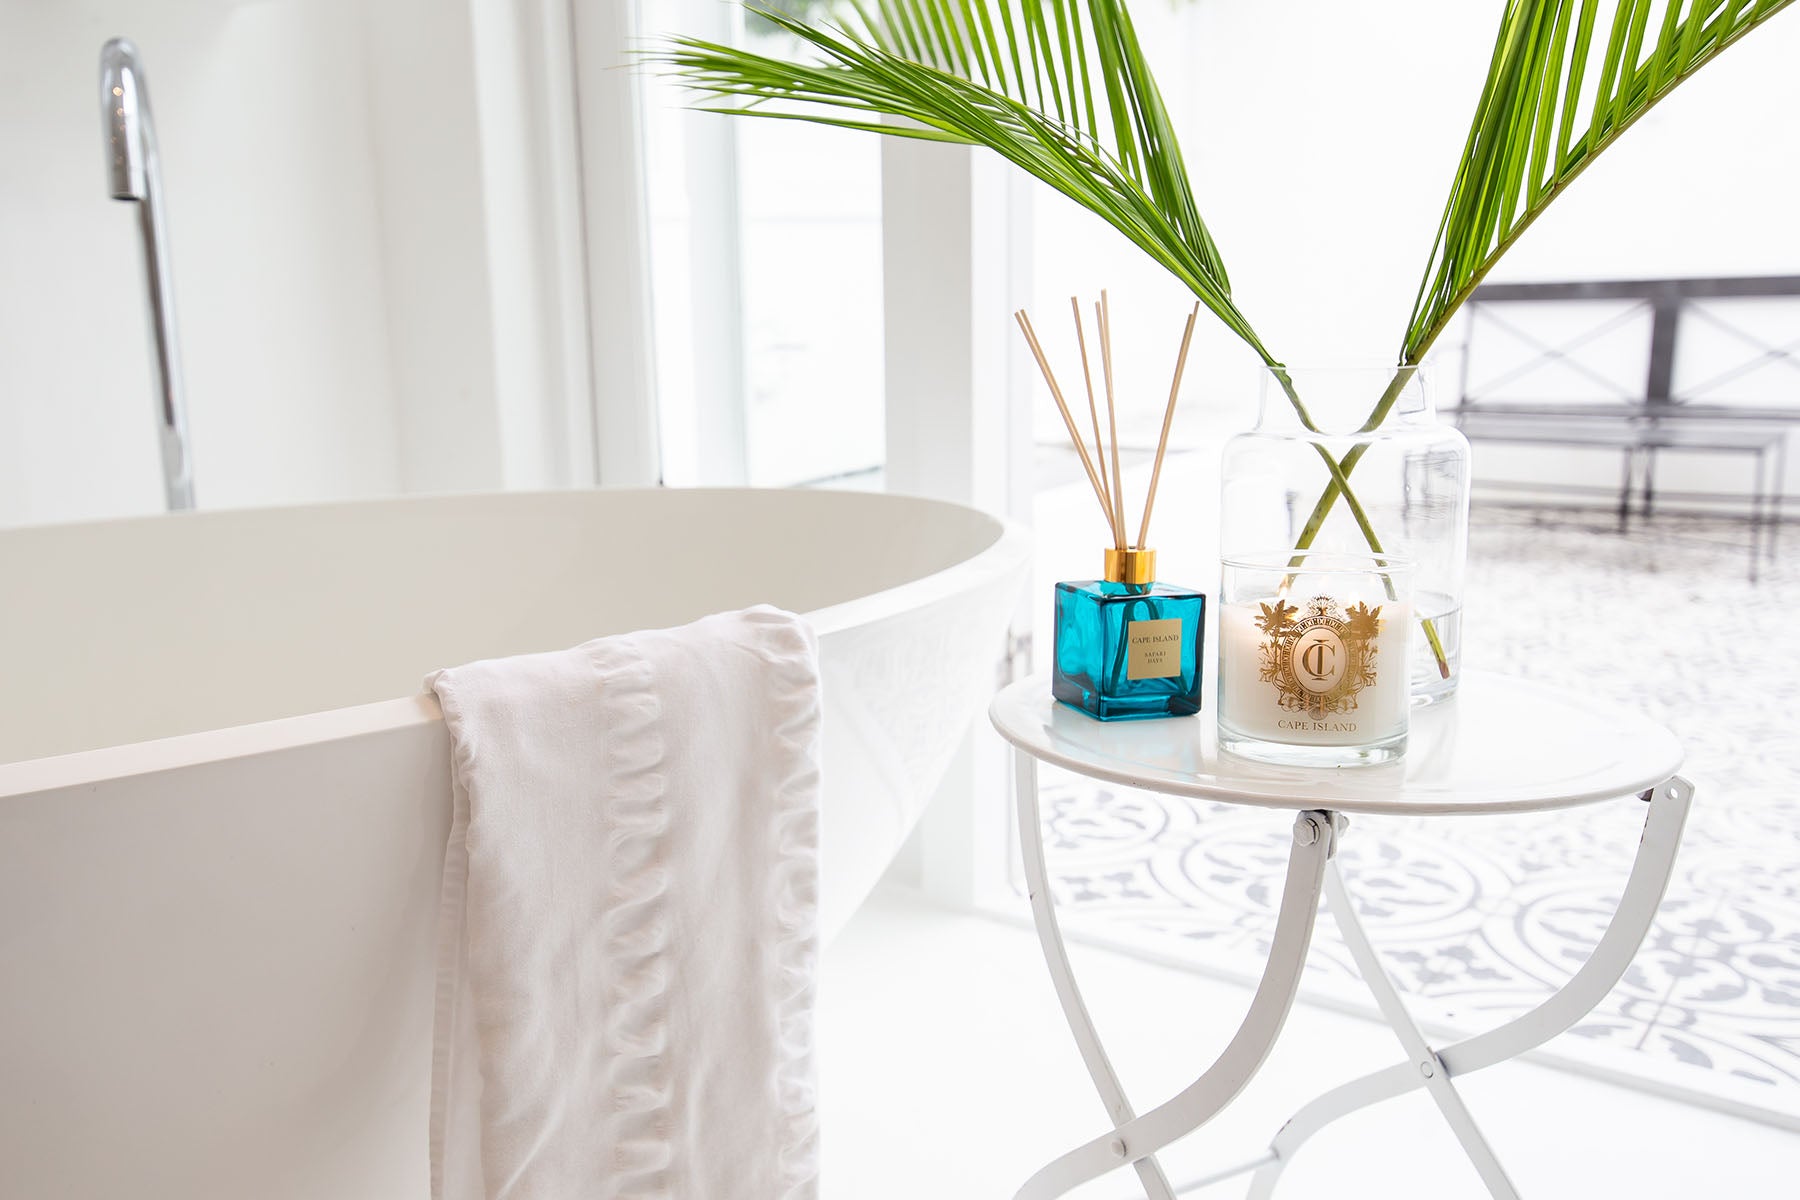 The Cape Island Clifton Beach diffuser and candle.. Cape Island luxury candles, soap products and home fragrances are available at Sarza home goods and furniture store in Rye New York.